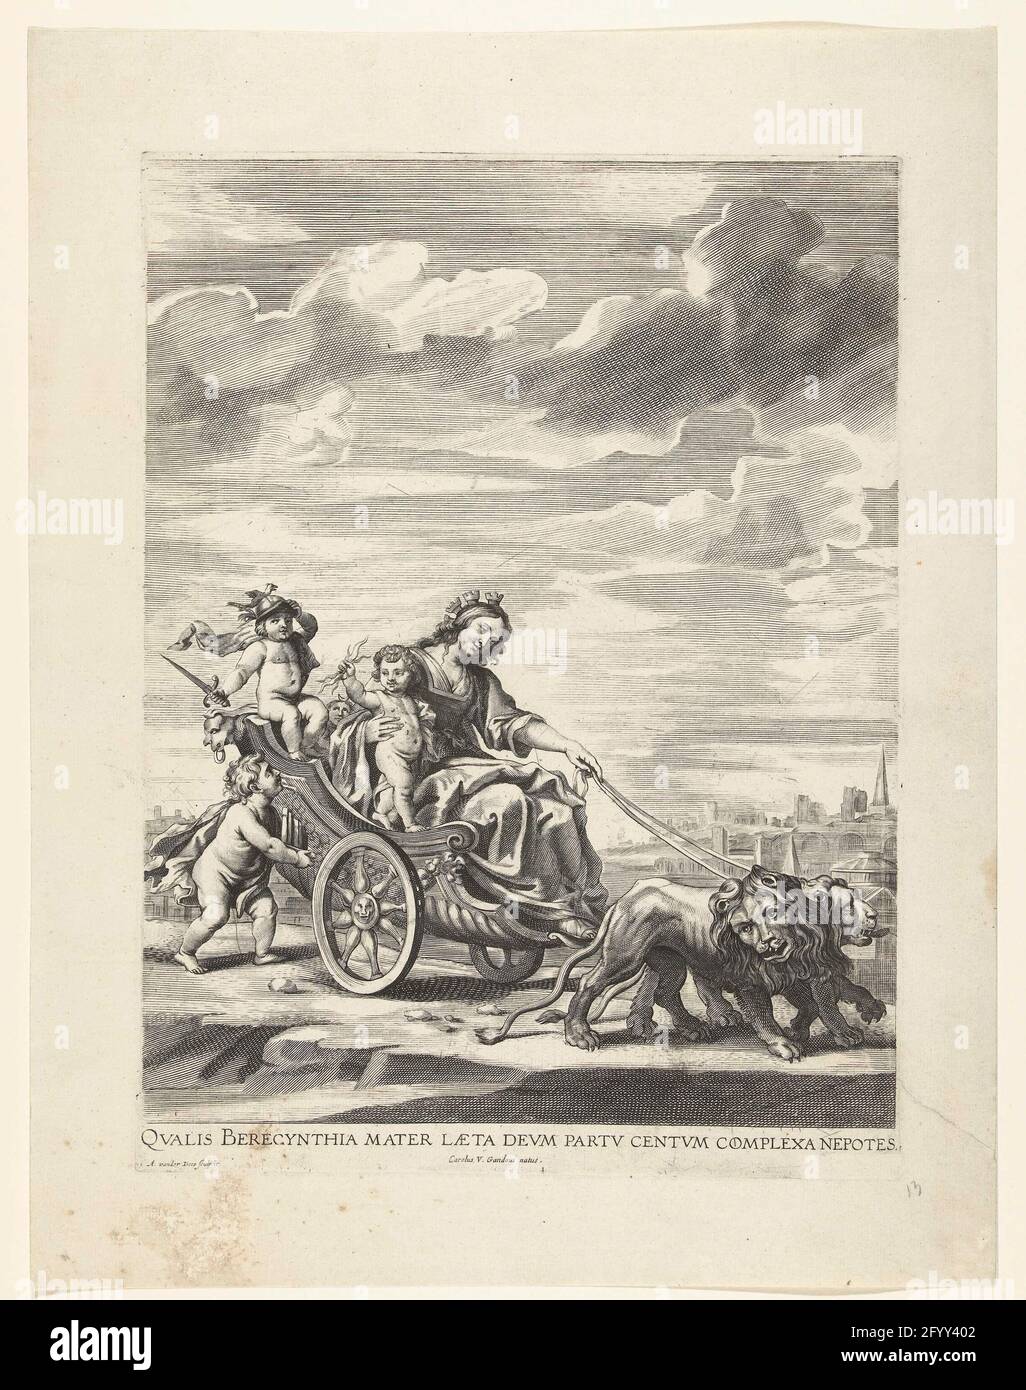 Allegory with the city mawn from Ghent in her chariot; entry from Ferdinand in Ghent in 1635 (no. 13); Qualis Berecynthia Mater Laeta Deum Partu Centum Complexa Nepotes / Carolus V. Gandavi Natus; Tabula I. Adversae Partis. Cybele Ganda Opposita. Allegory with the city mawn from Ghent in her chariot drawn by lions. Allegory with Cybele such as Ghent as the birthplace of Emperor Charles V. Performance at the top of the rear of the triumph port Arcus Fernandi on the Friday market. Leaf No. 13 in a set of 42 plates that illustrate the publication of the description of the arrival of the Cardinal Stock Photo